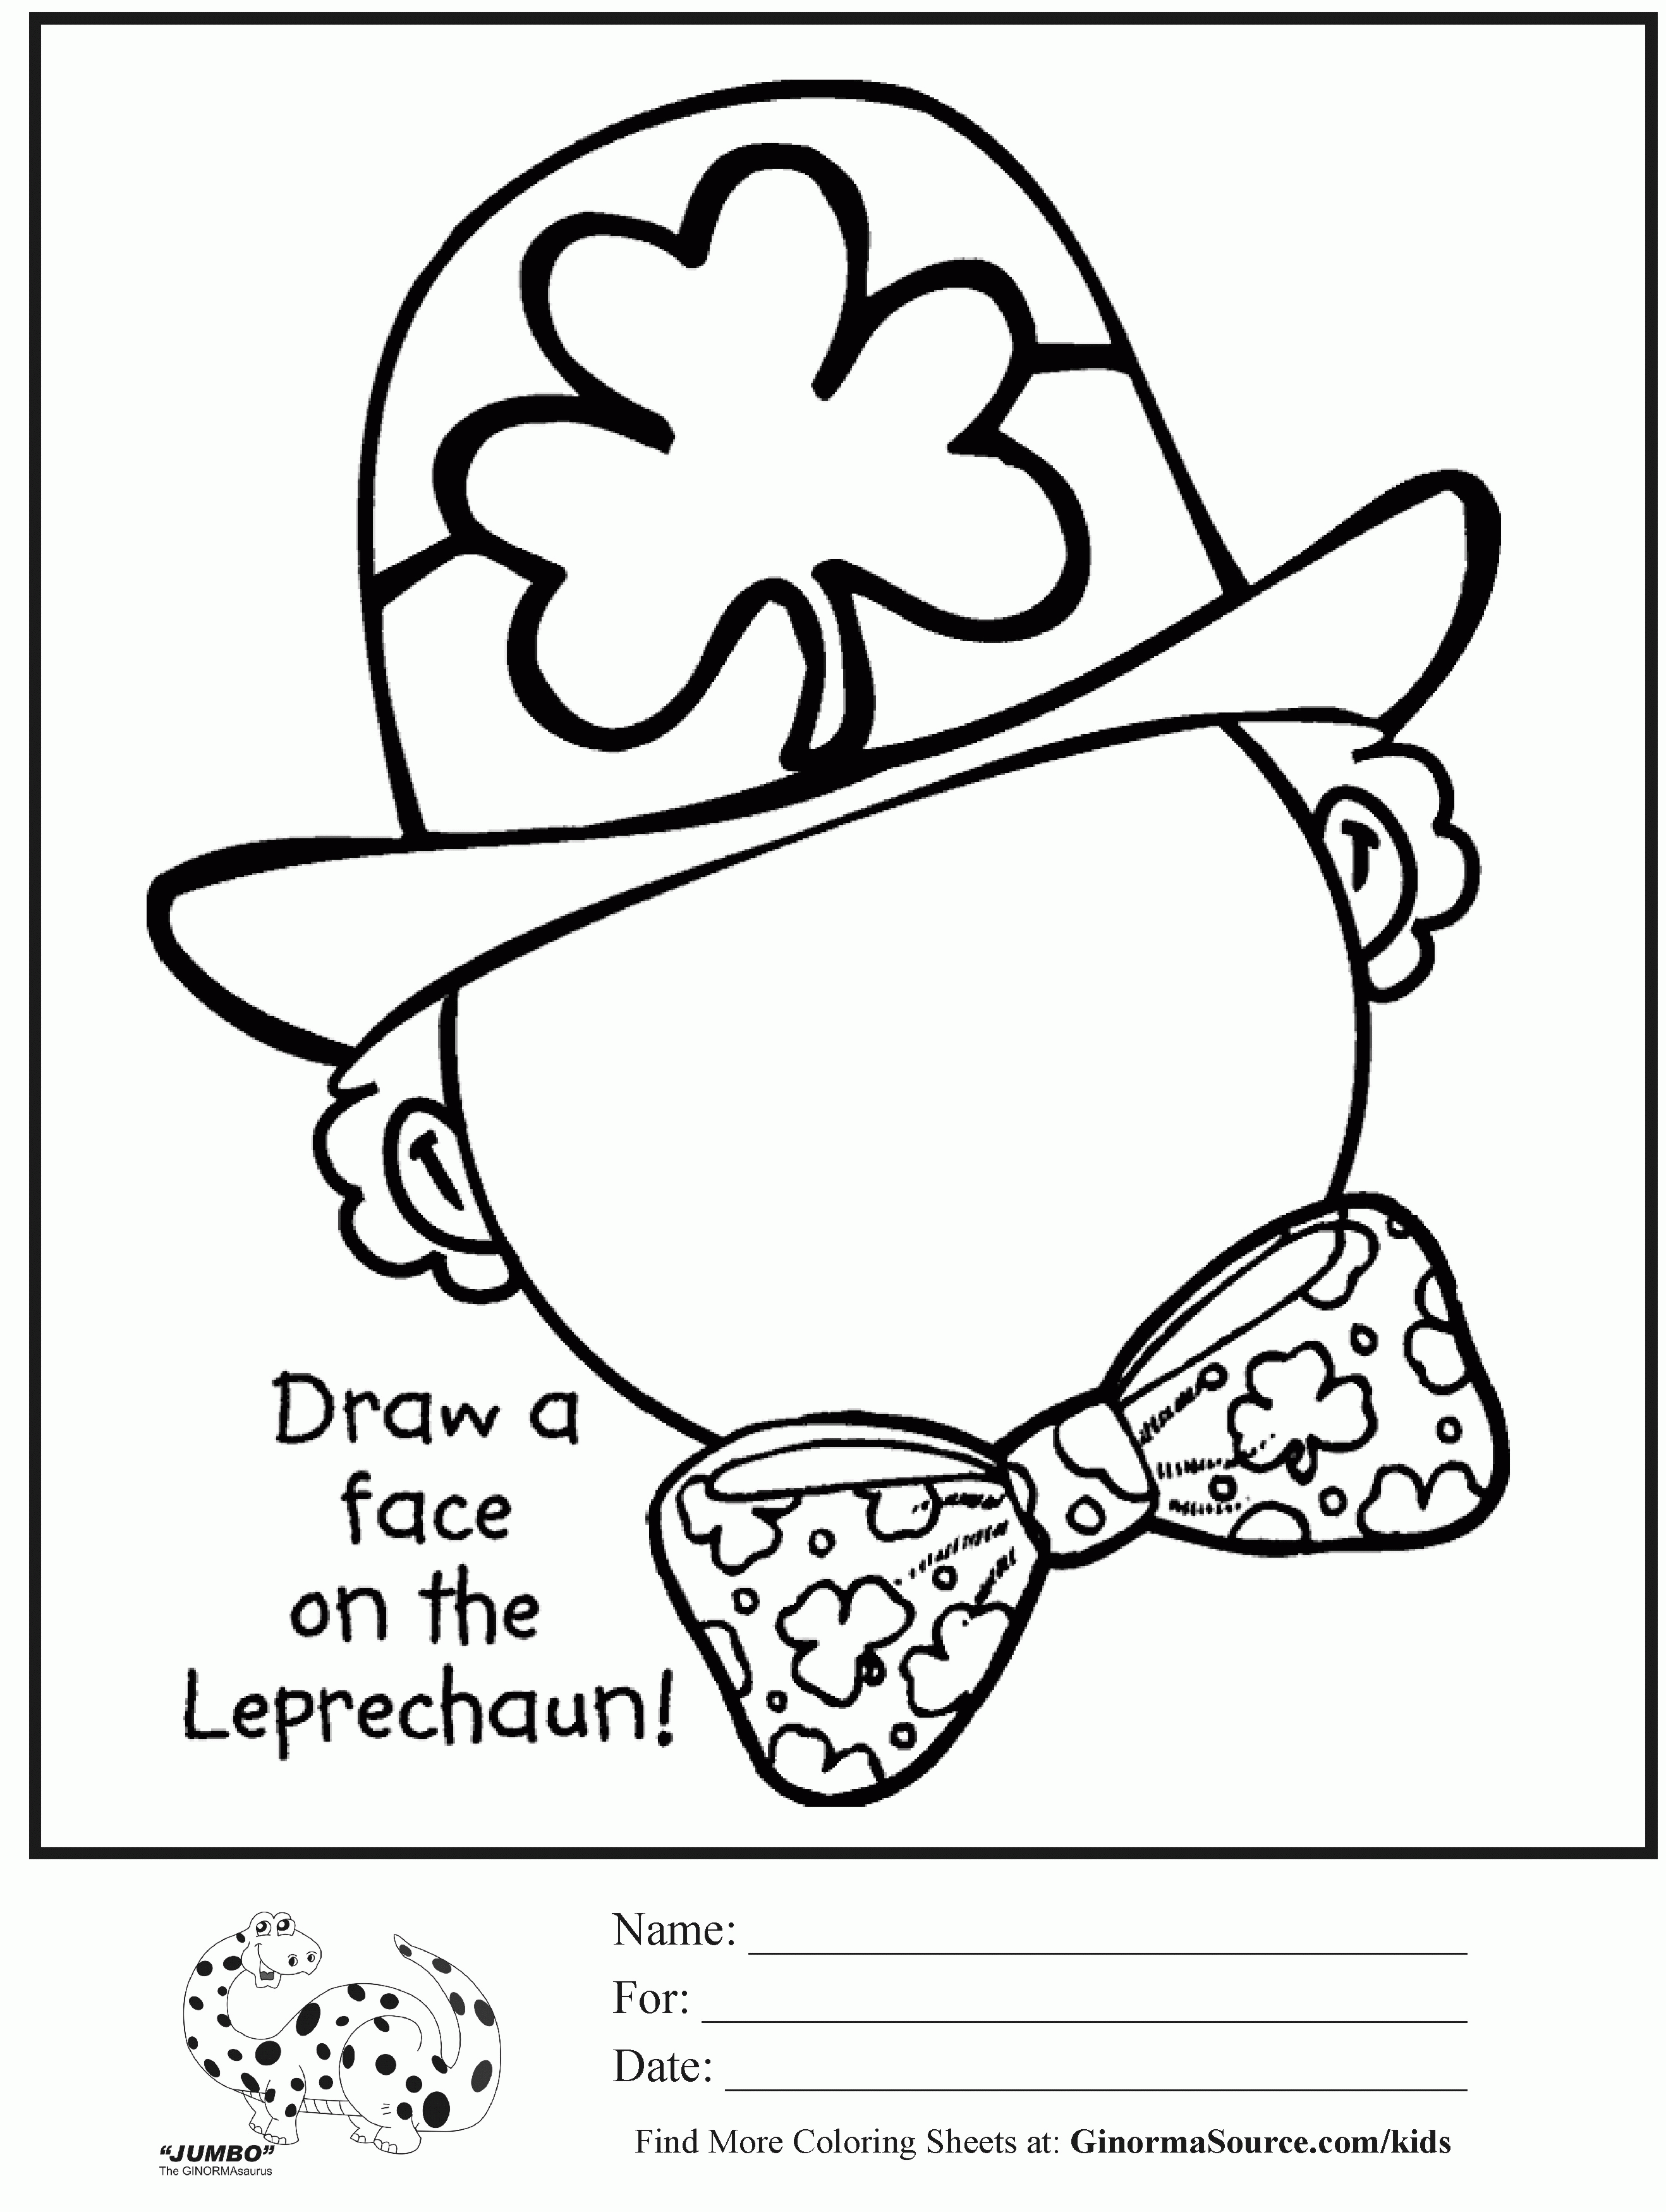 pics-of-snoopy-st-patrick-s-day-coloring-page-patrick-s-coloring-home